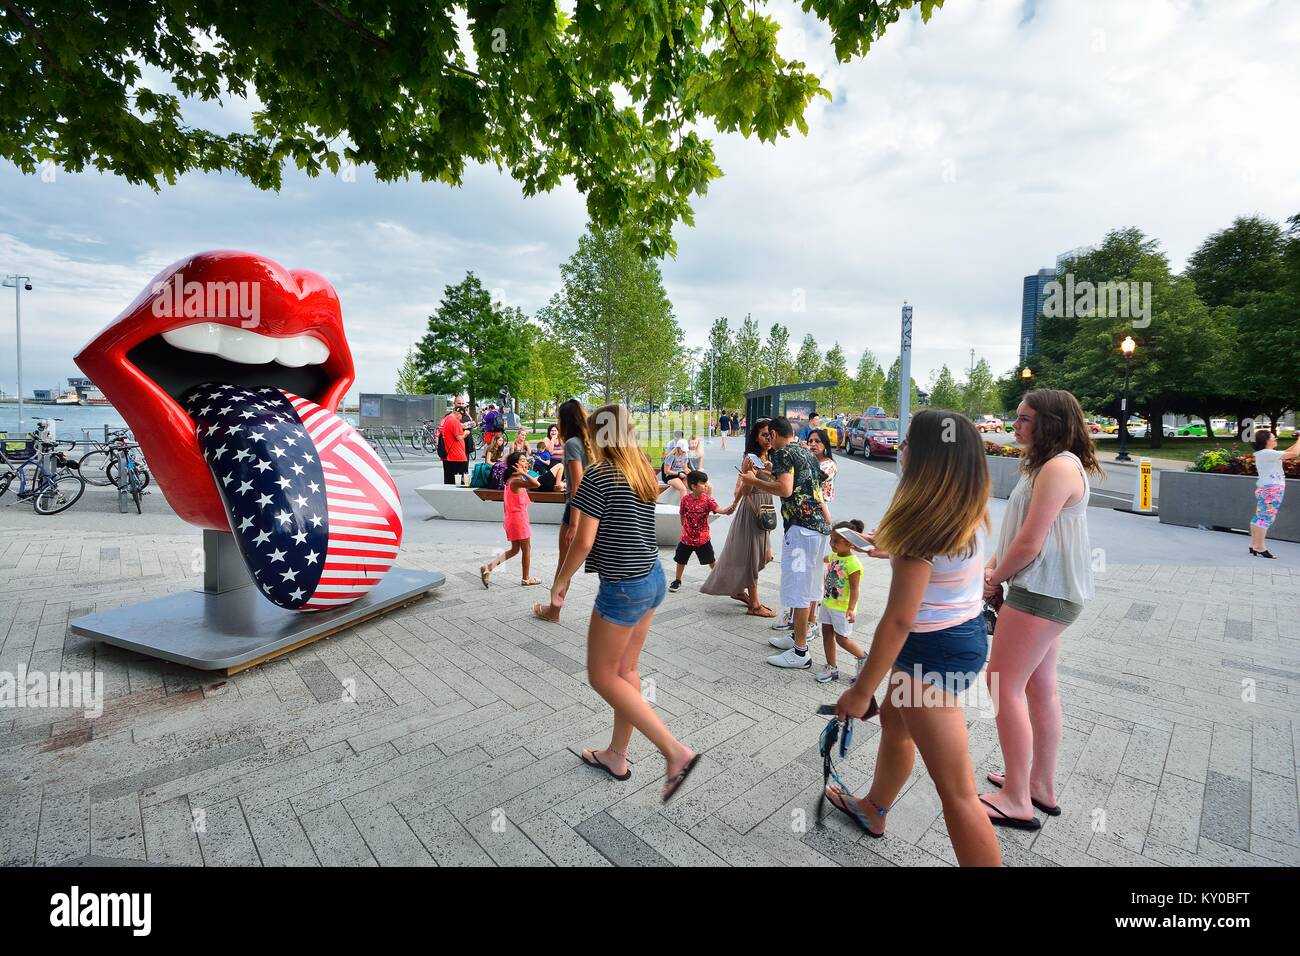 Chicago, IL - July 15, 2017: The Rolling Stones famous tongue and lips at Navy Pier of Chicago. Rolling Stones ExhibitionismÕs first ever major exhibi Stock Photo